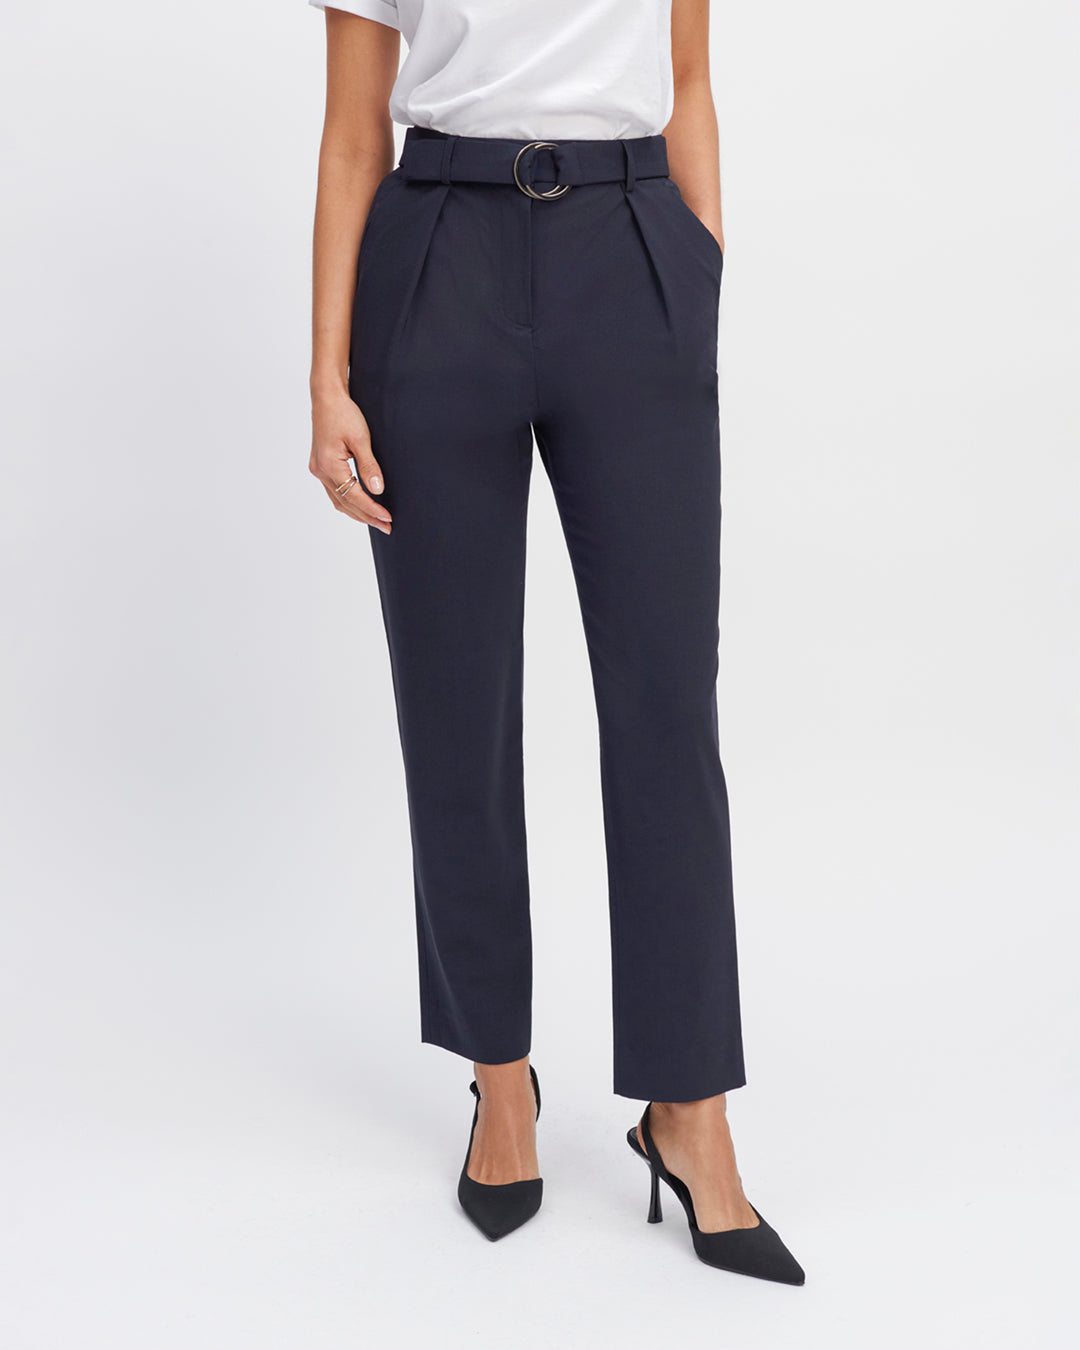 "Tailored pants in navy blue-7-8th waist-high-Loop-under-belt-Two-pockets-Italian-style-Belt-assorted-tone-on-tone-Zip-close-staple-before-17H10-tailors-for-women-paris-"